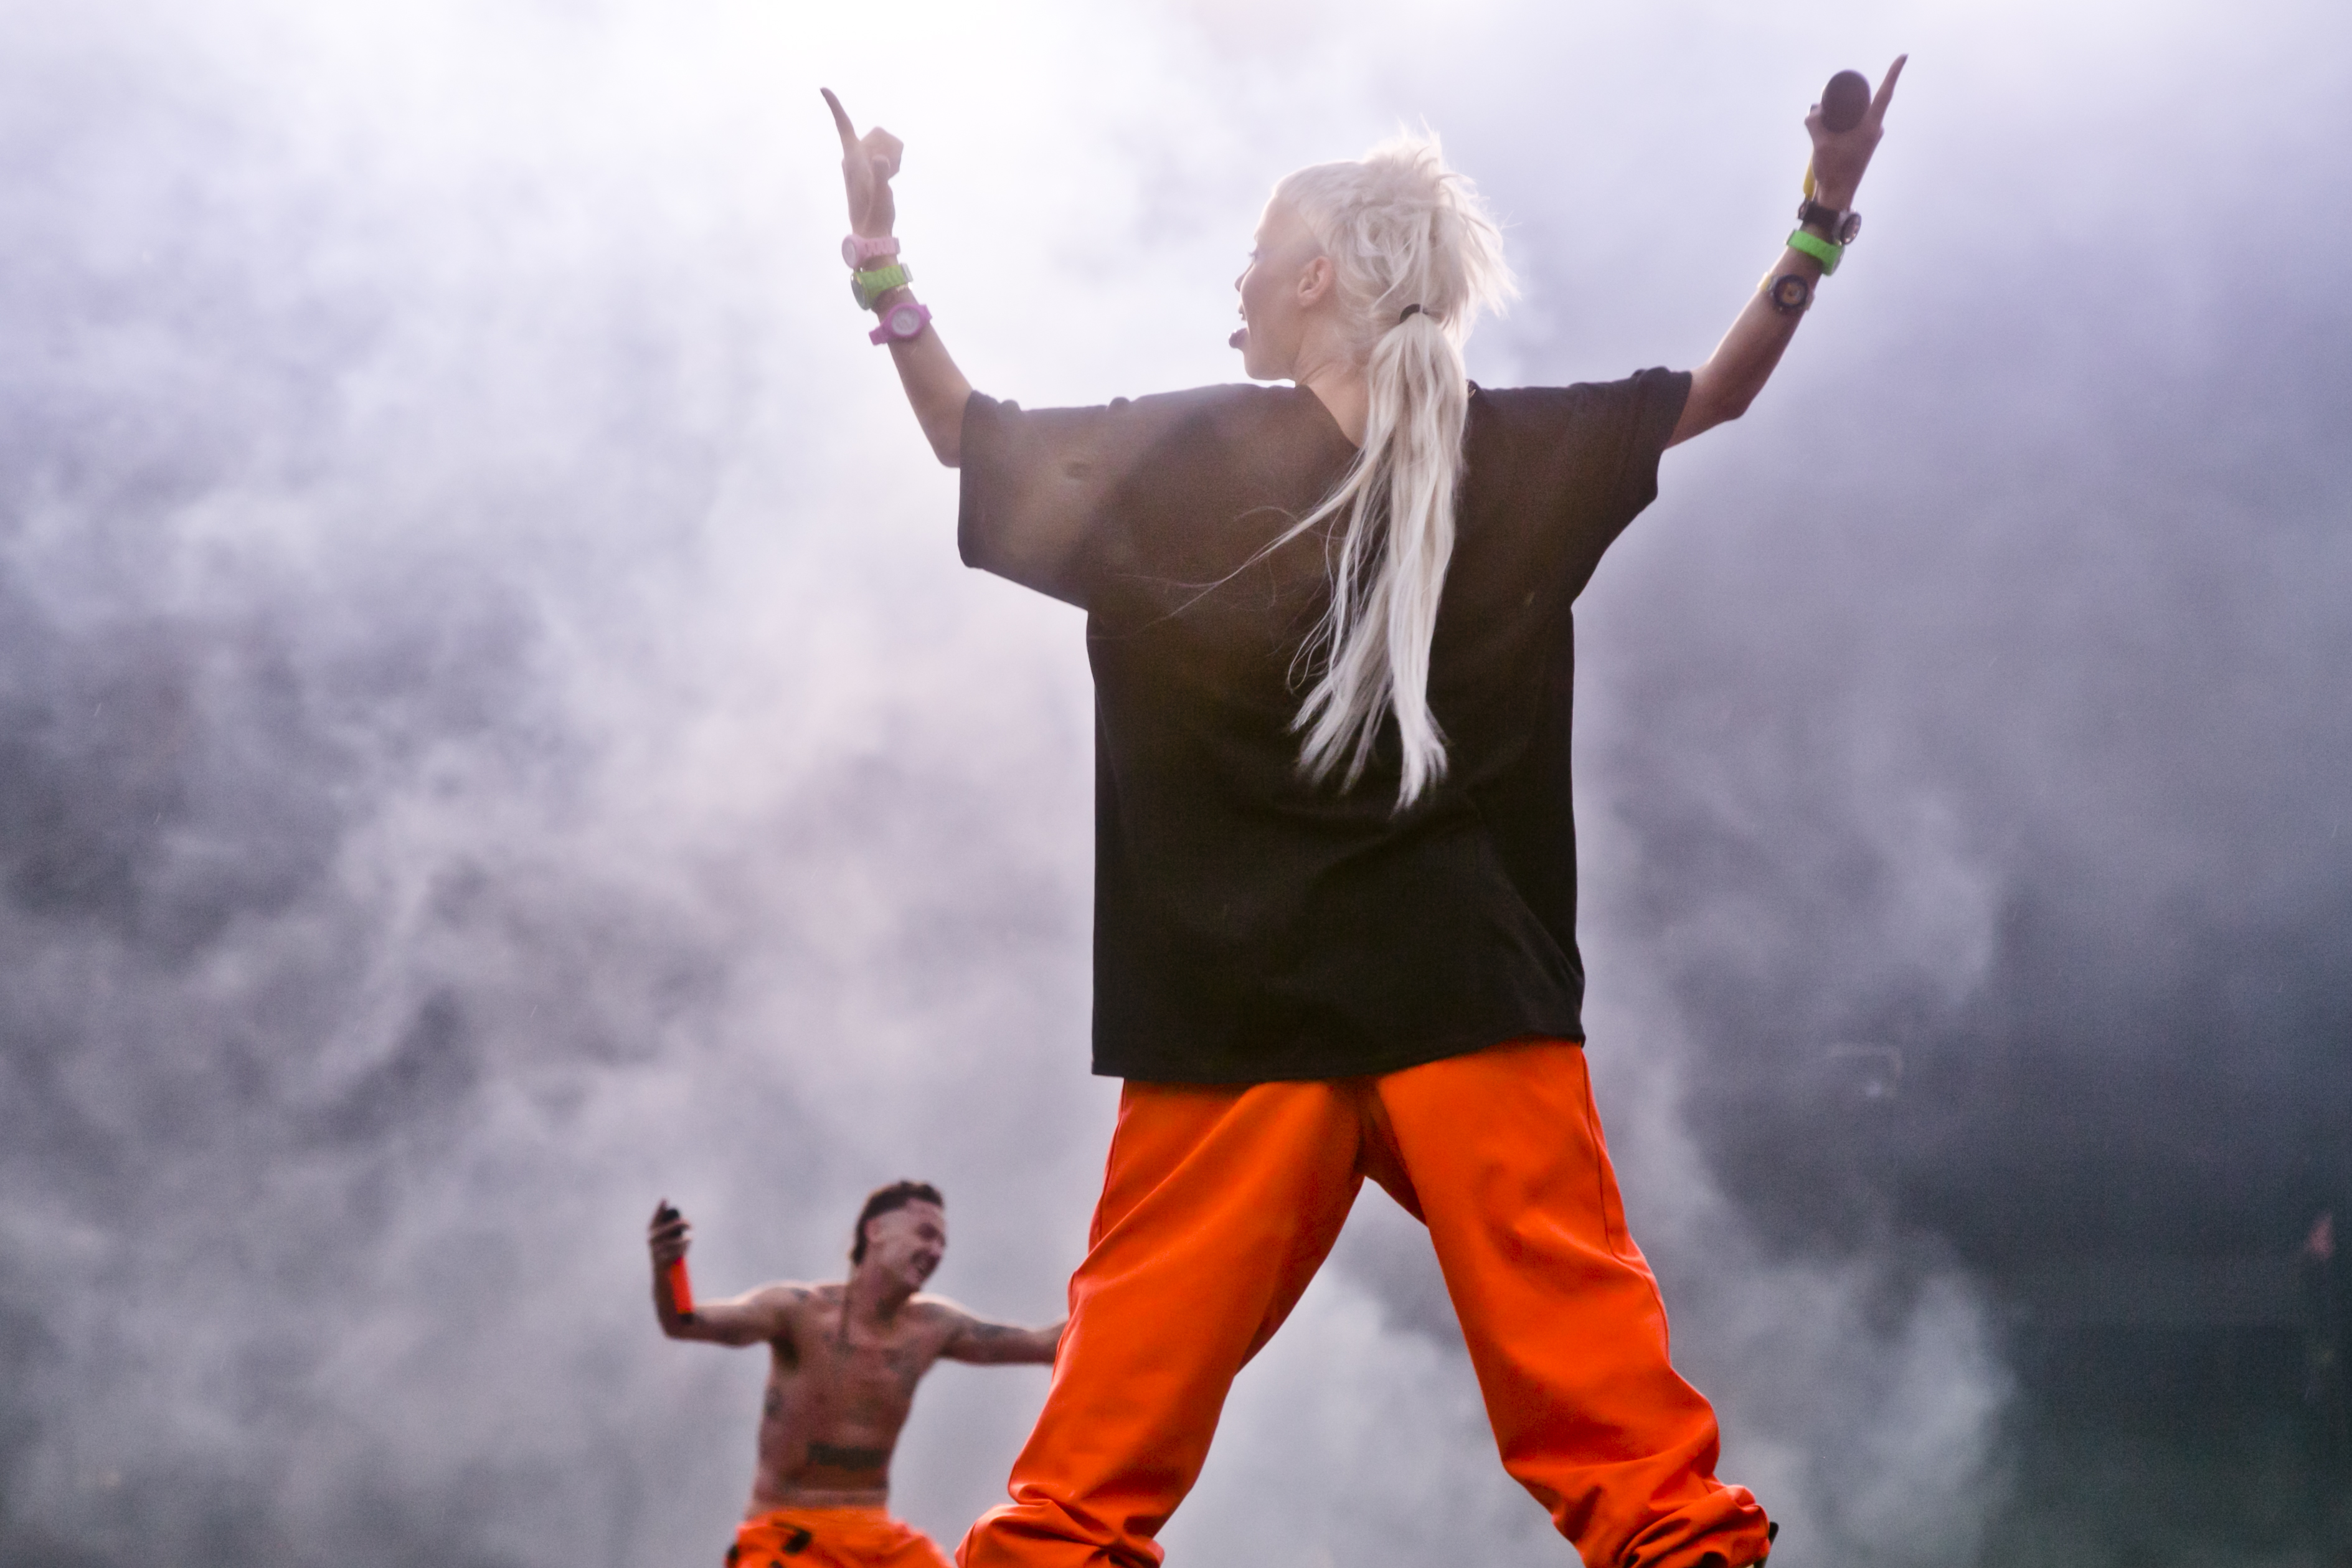 Die Antwoord at Sziget Festival, Budapest, Hungary - 10 August 2016